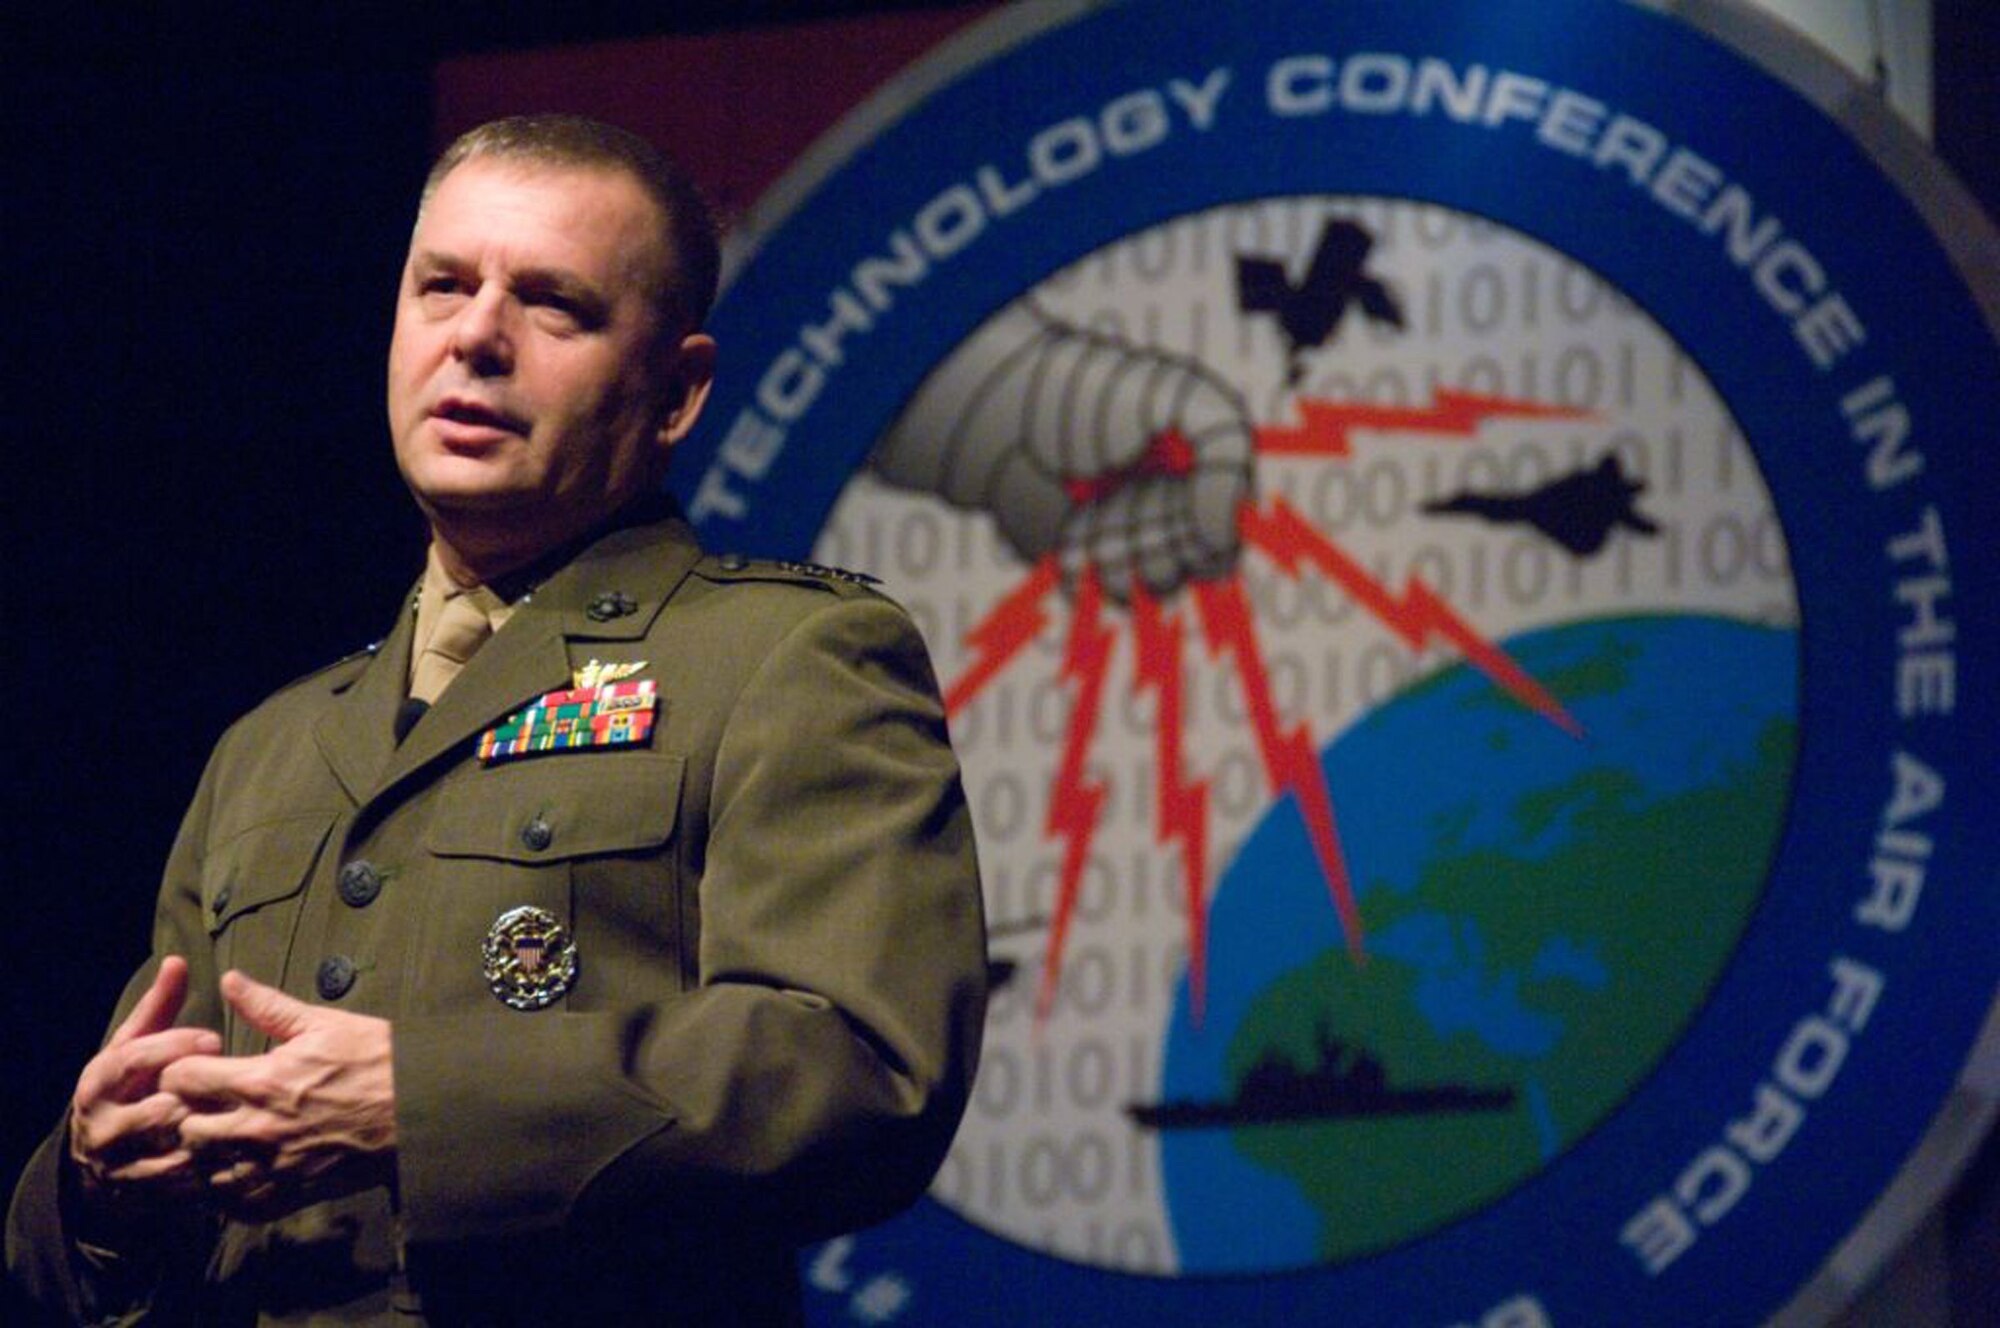 The modern warfighter has found “tremendous advantages in networking organizations,” Gen. James Cartwright, vice chairman of the Joint Chiefs, told more than 5,700 Air Force Information Technology Conference attendees. General Cartwright, Gen. Norton Schwartz, Air Force chief of staff, in addition to other keynote speakers addressed participants at the opening of the 2009 AFITC in Montgomery, Ala., Aug. 24. The three-day conference ends Aug. 27. (U.S. Air Force photo/Melanie Rodgers Cox)